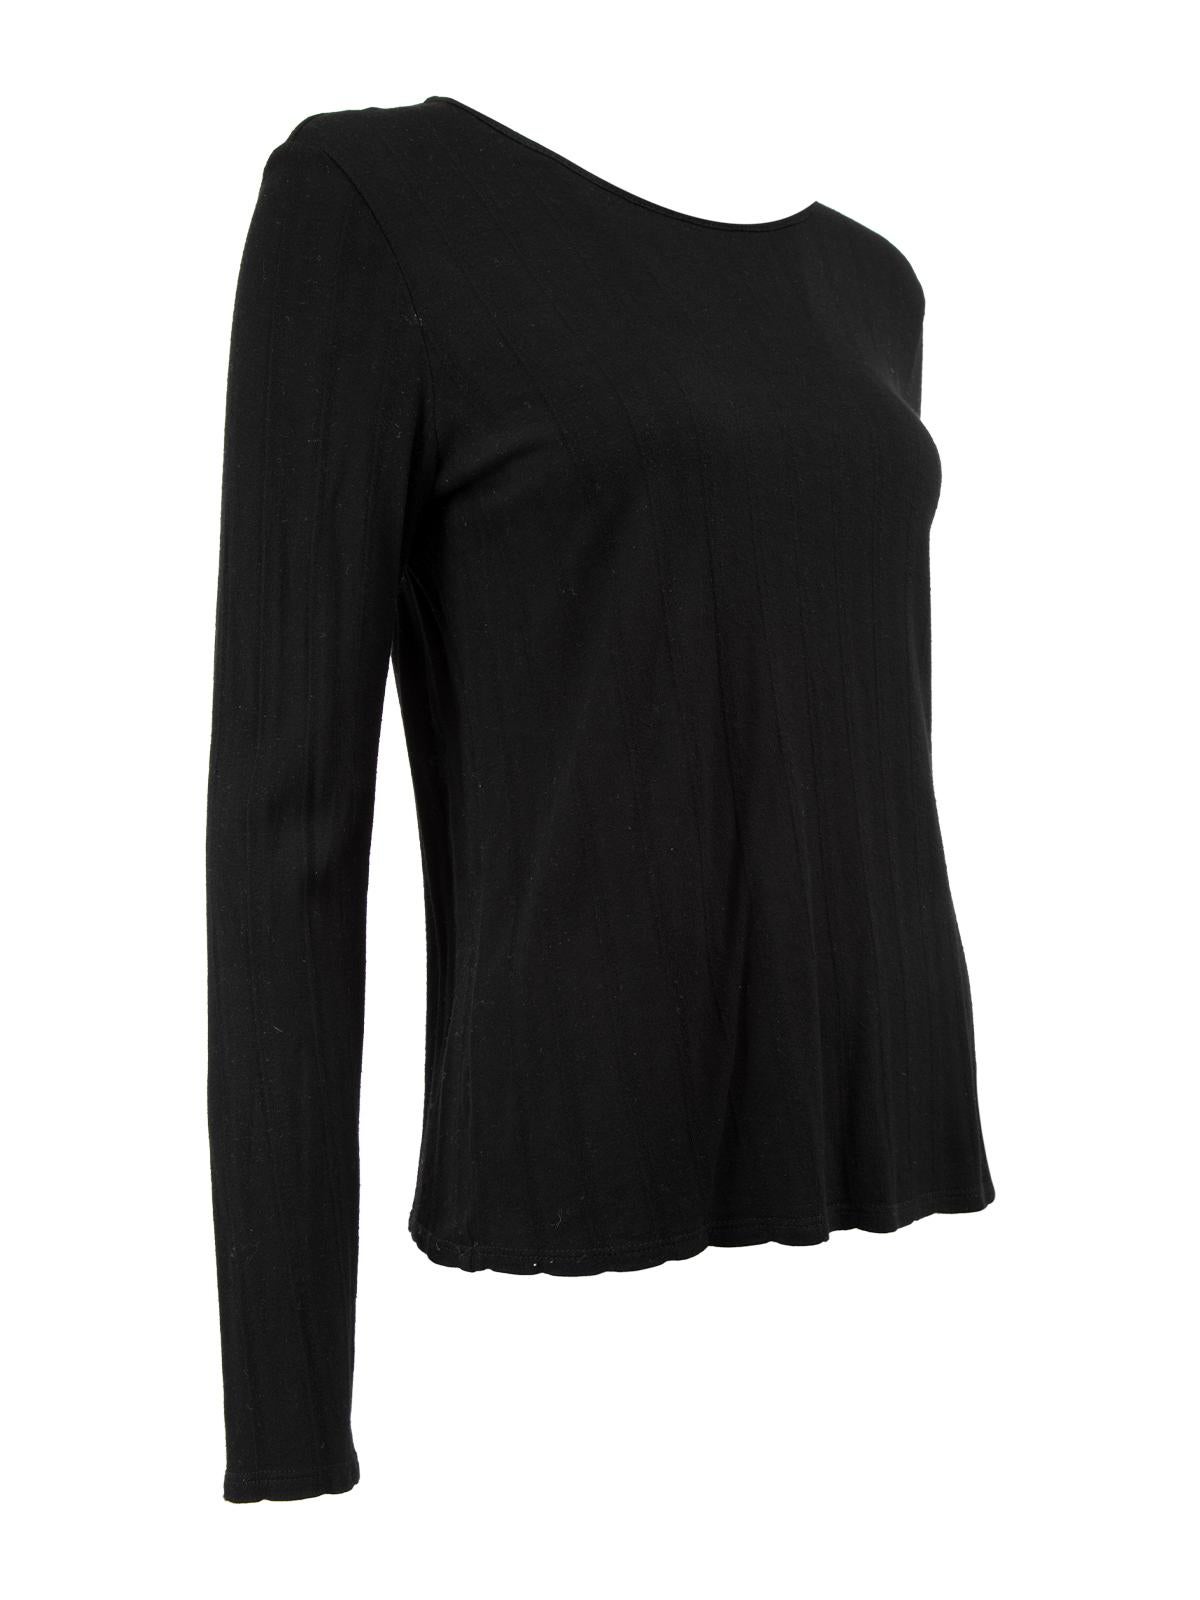 CONDITION is Very good. Minimal wear to top is evident. Minimal pilling seen on this used The Row designer resale item. 
 
 Details
  Black
 Viscose
 Top
 Long sleeves
 Crew neckline
 
 
 Made in USA 
 
 Composition
 88% Viscose and 12% Silk
 
 Care